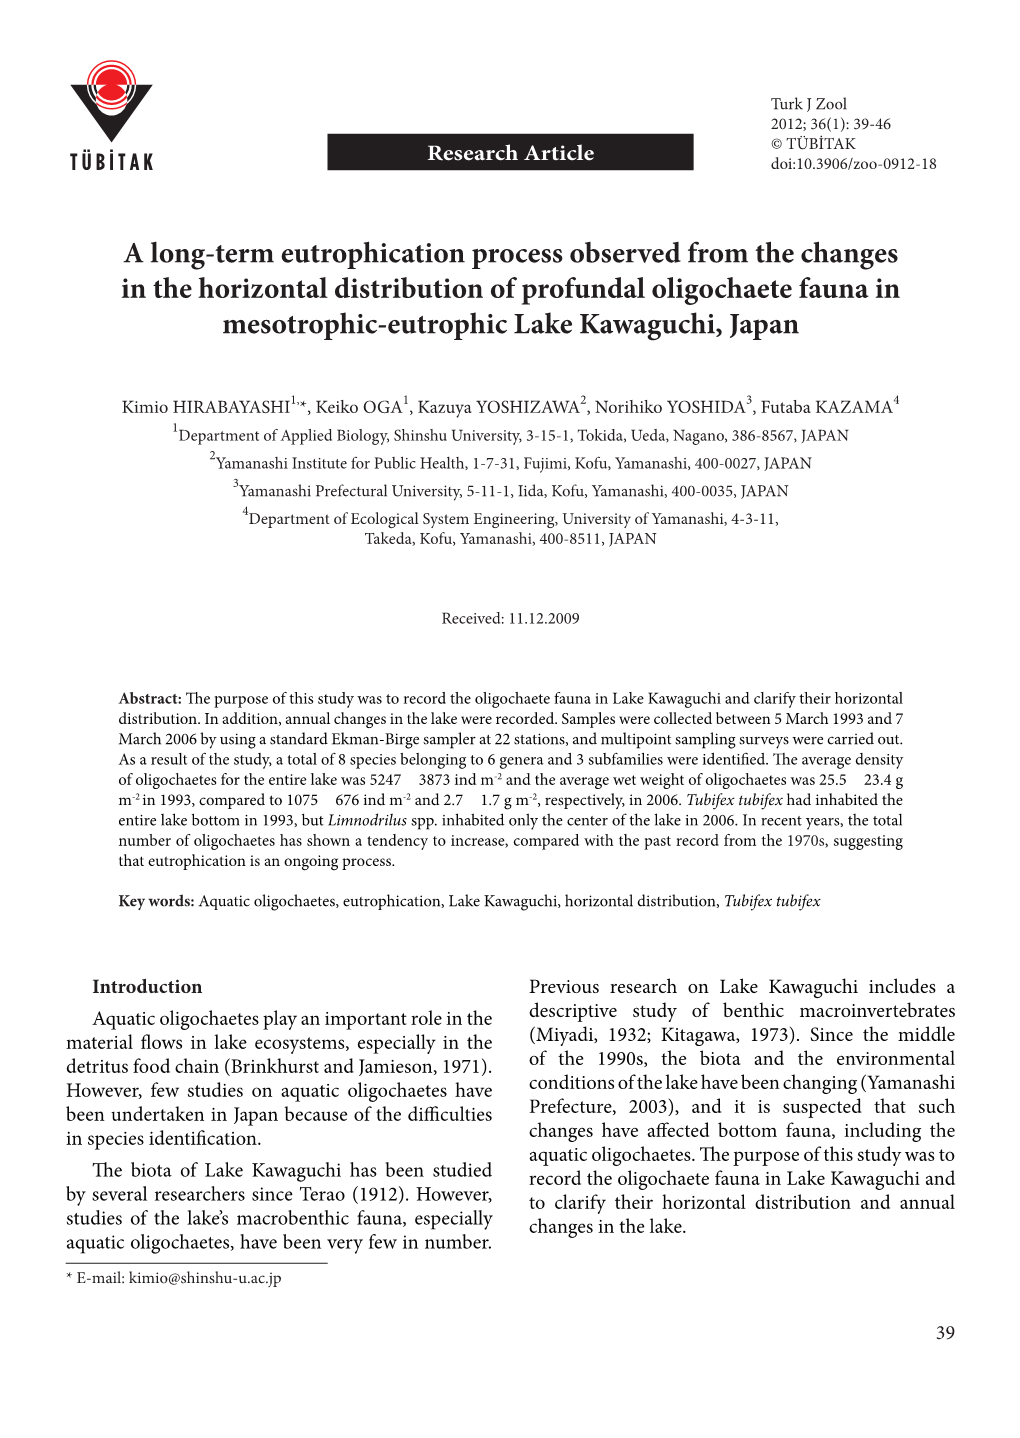 A Long-Term Eutrophication Process Observed from the Changes in The